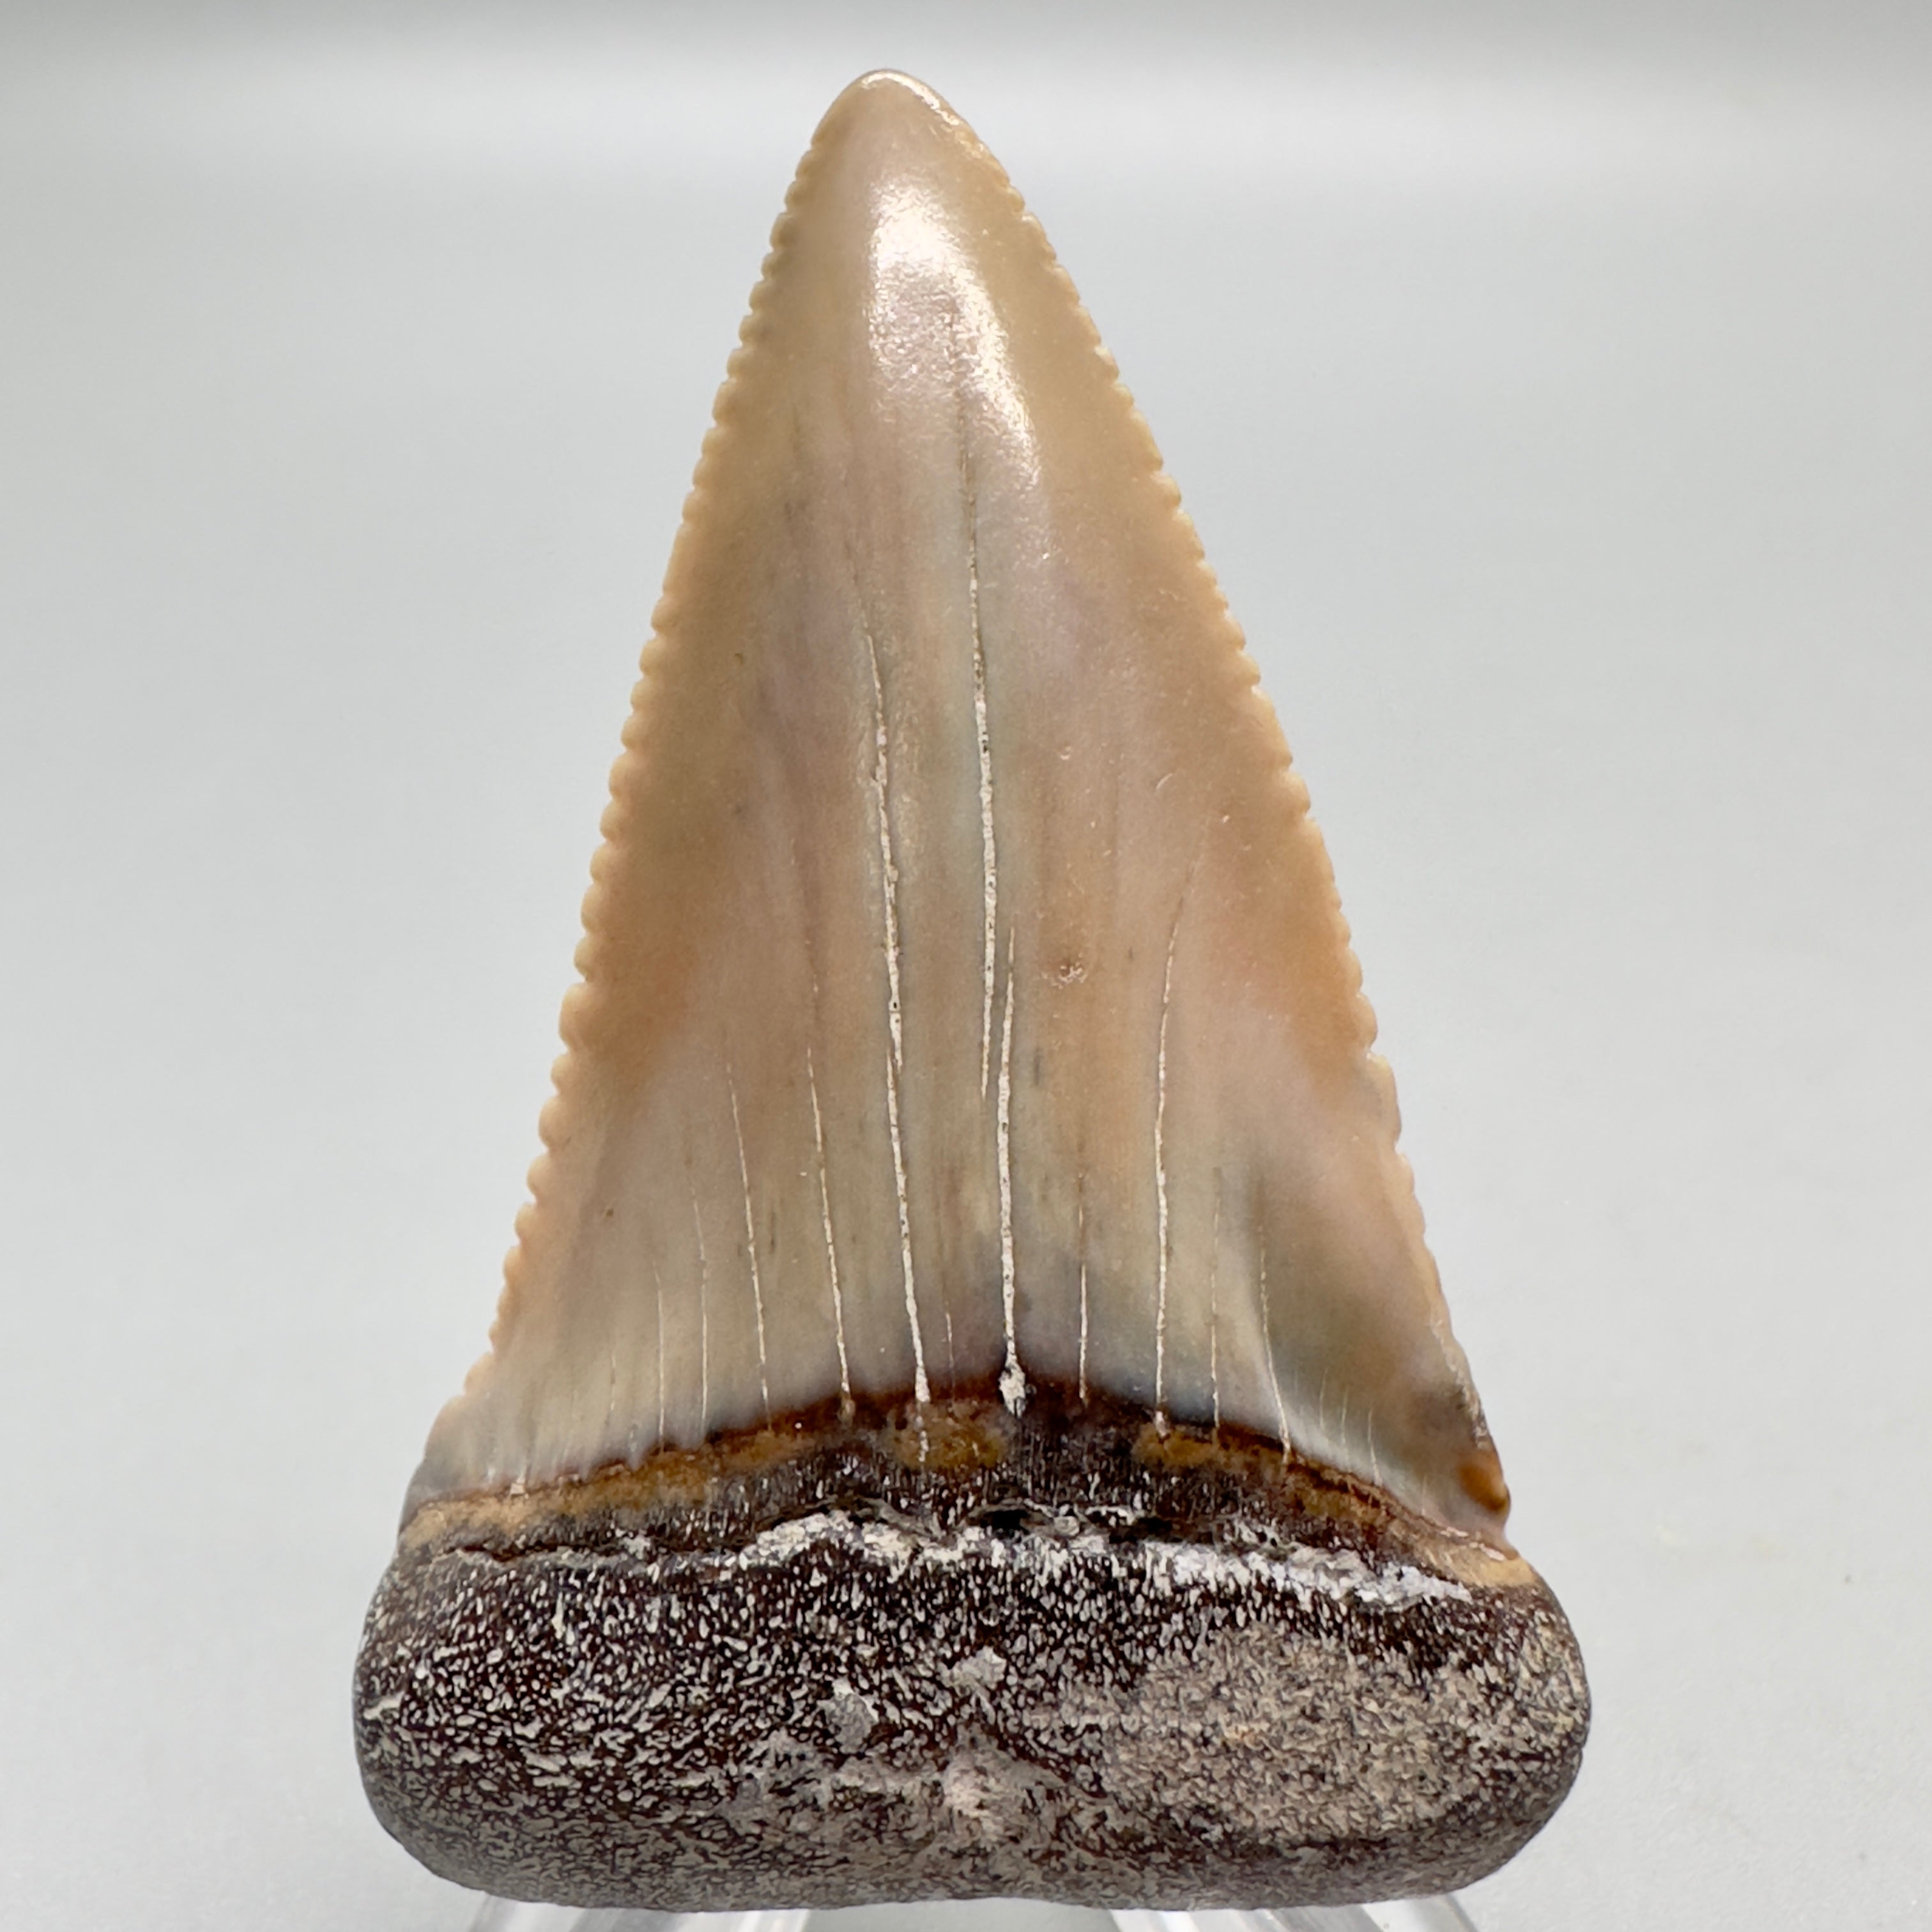 Rare 2.16 Colorful Fossil Great White Shark Tooth from Sacaco, Peru - –  Megalodon Teeth